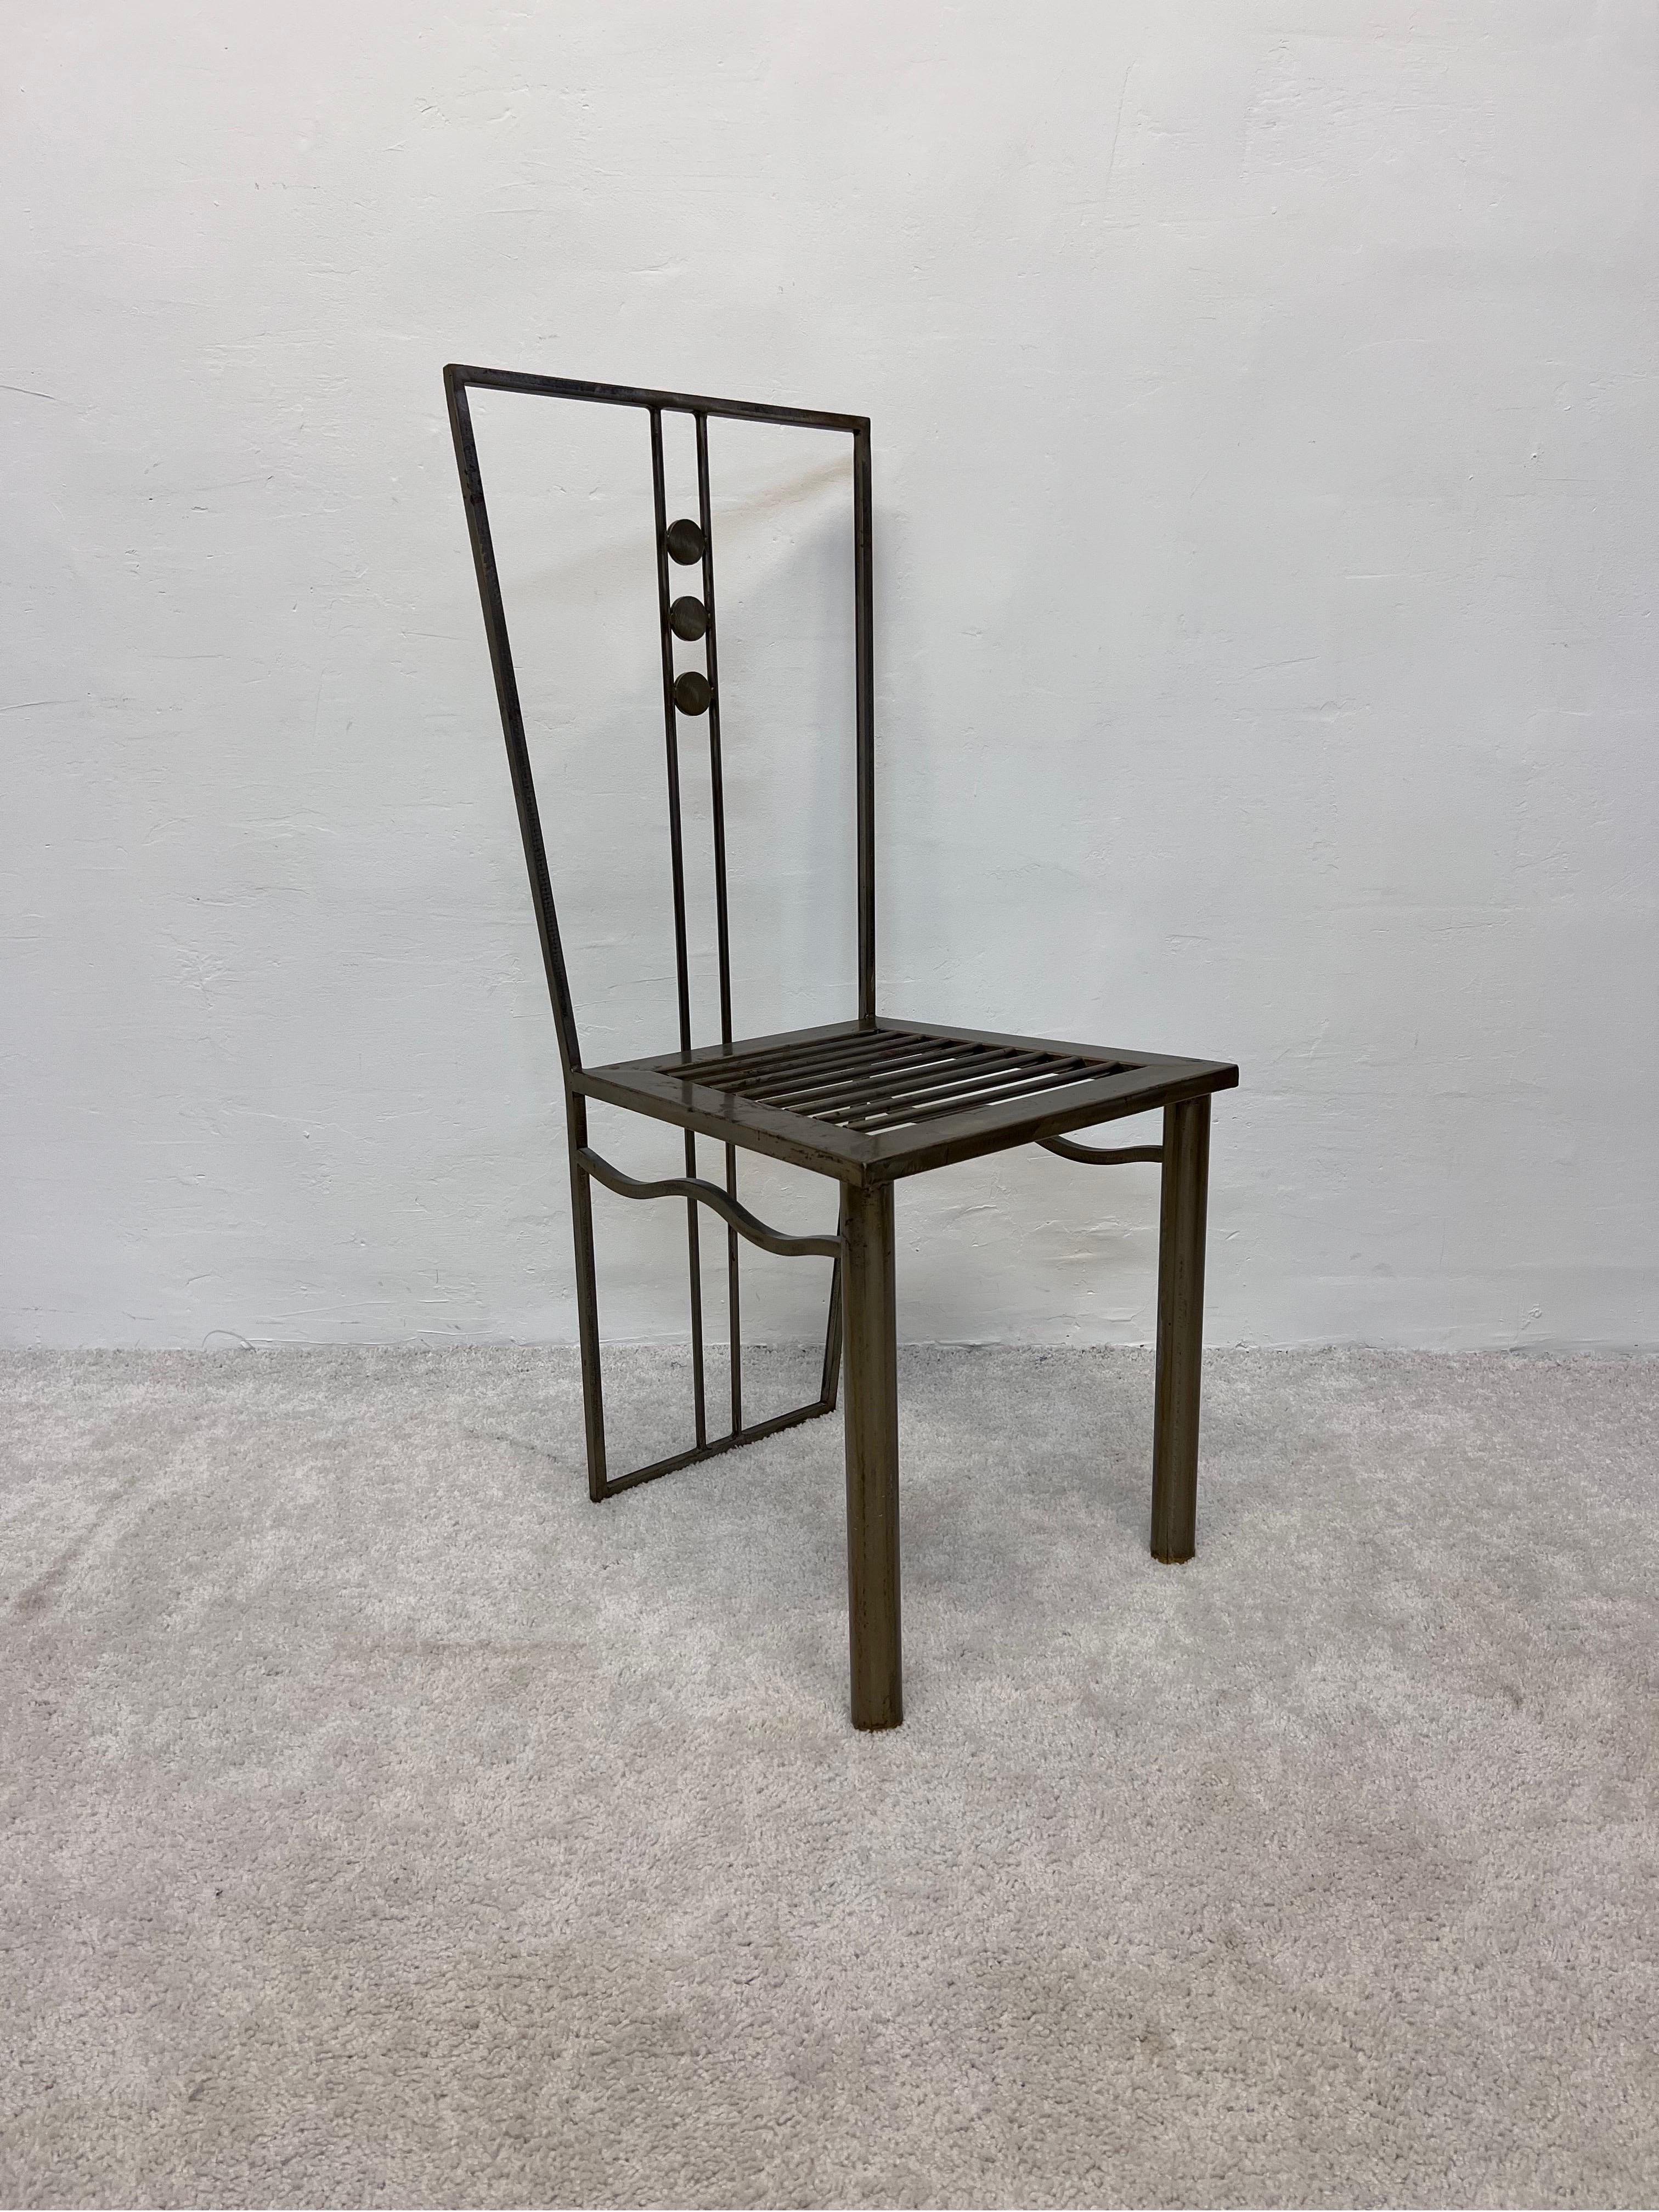 Post-Modern Postmodern Sculptural Studio Crafted Steel Dining or Side Chair, 1990s For Sale